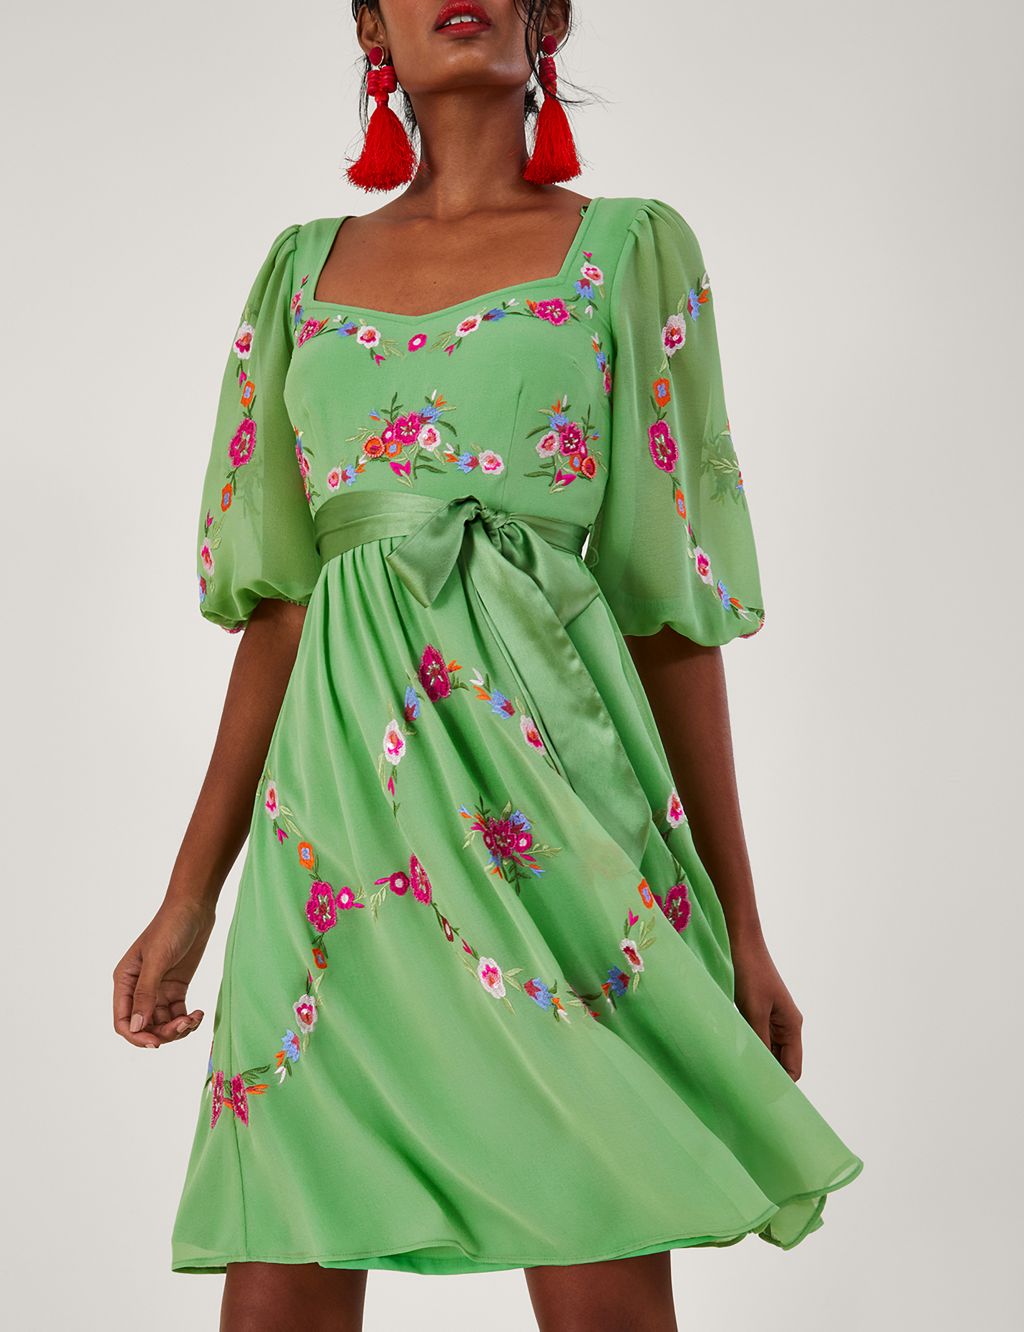 Floral Embroidered Square Neck Waisted Dress image 1